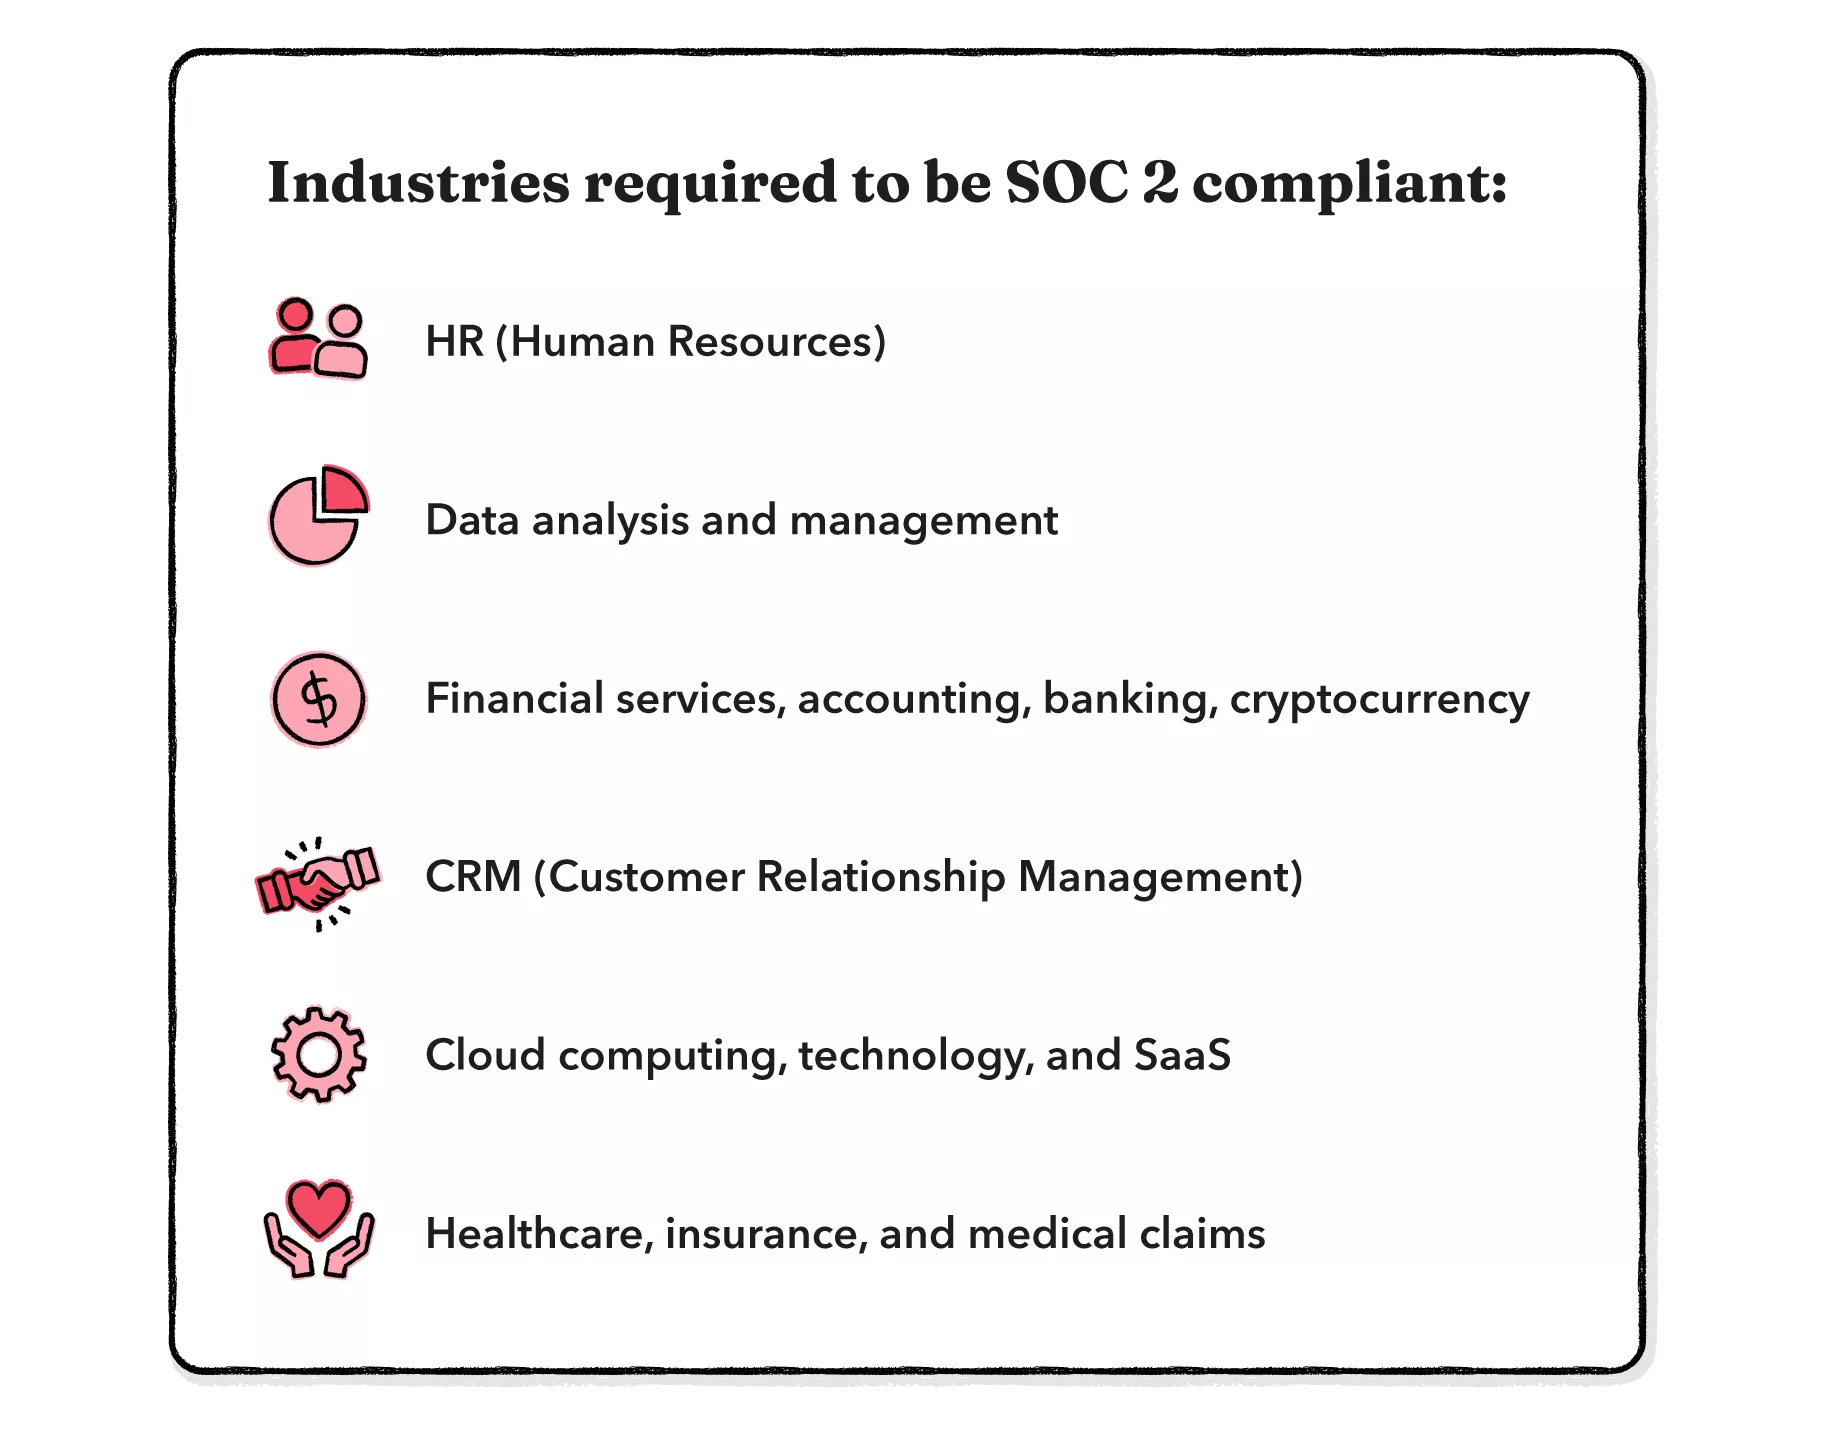 industries required to be SOC 2 compliant